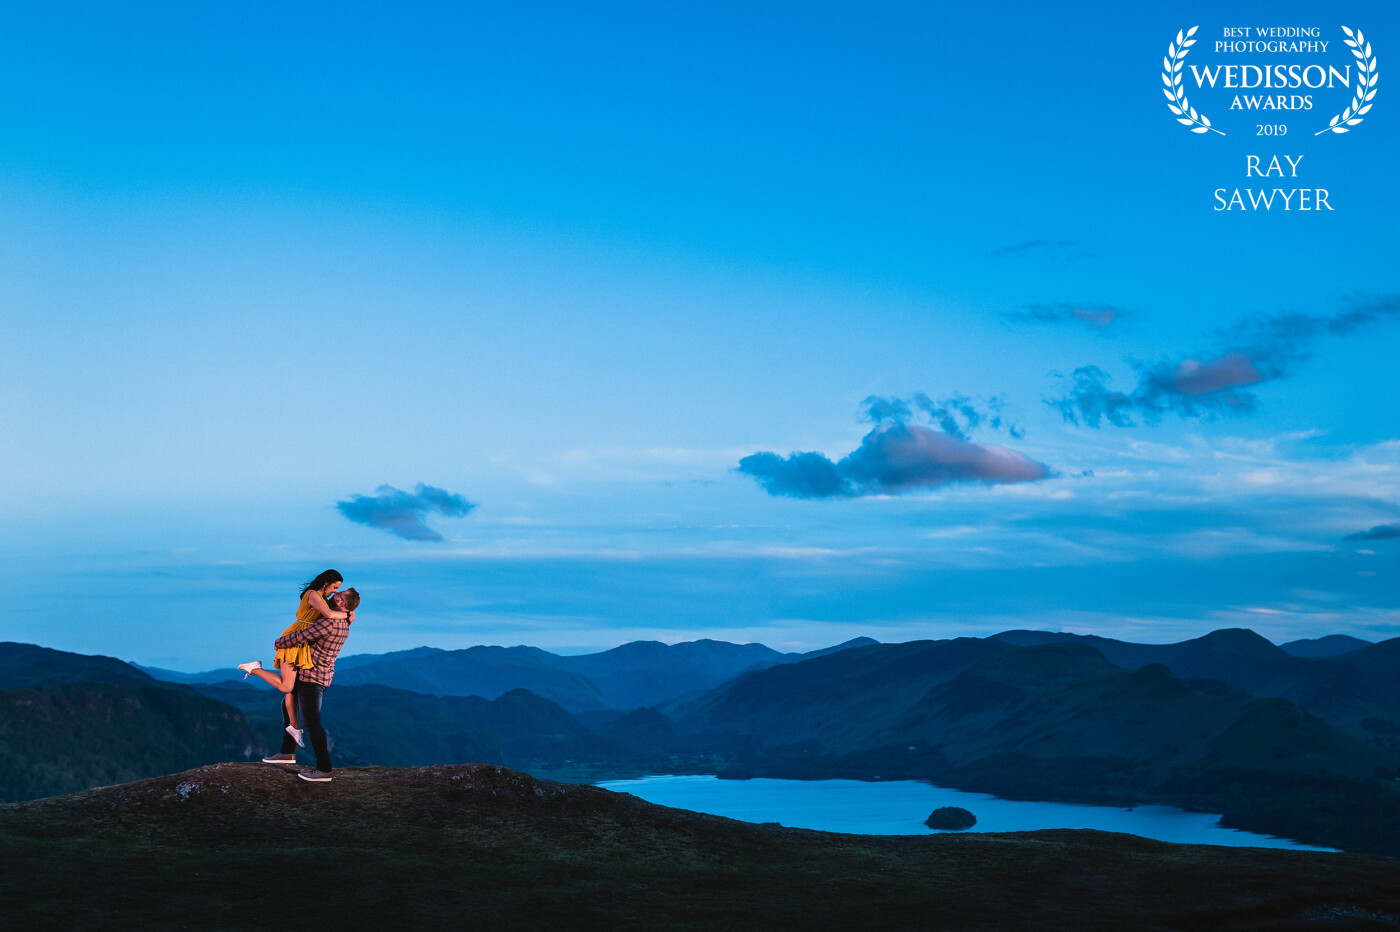 Captured during sunset in the Lake District. Latrig overlooking Keswick and Derwentwater. We were the only ones up there with a full photography setup. I got the shot and was even turned into large wall art.